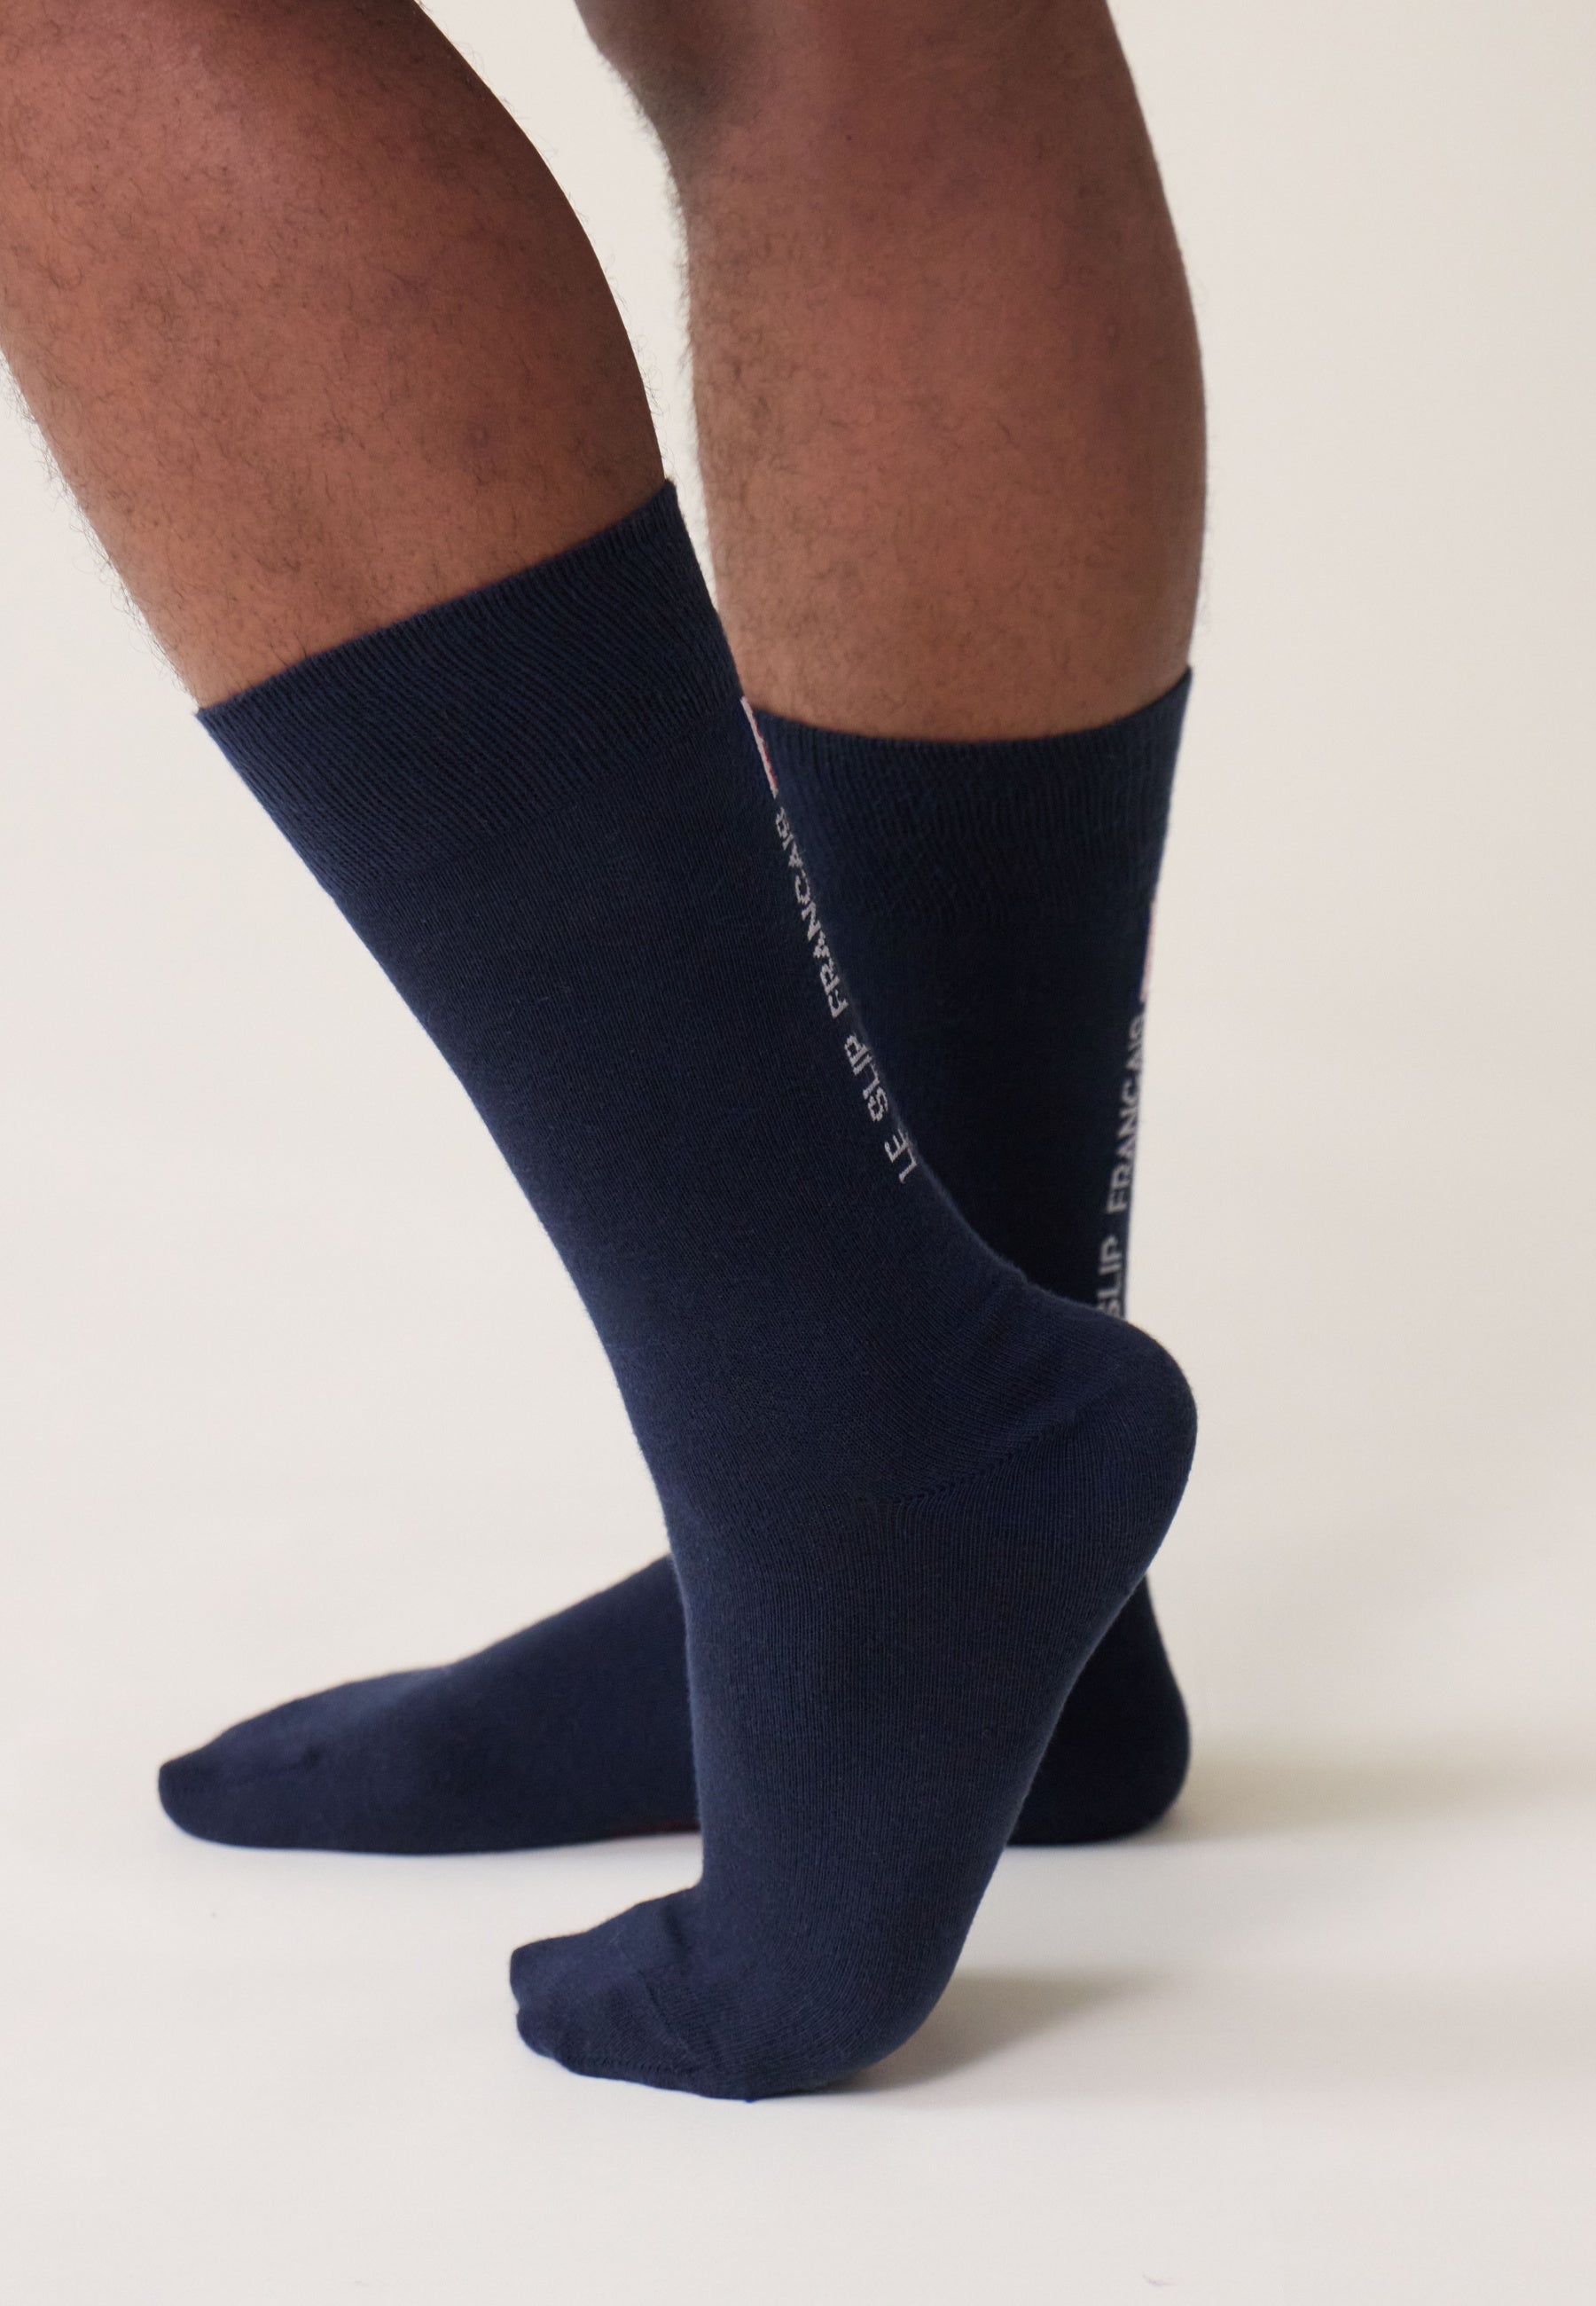 Chaussettes brodées homme MONTLISOCKS marine made in France en coton bio